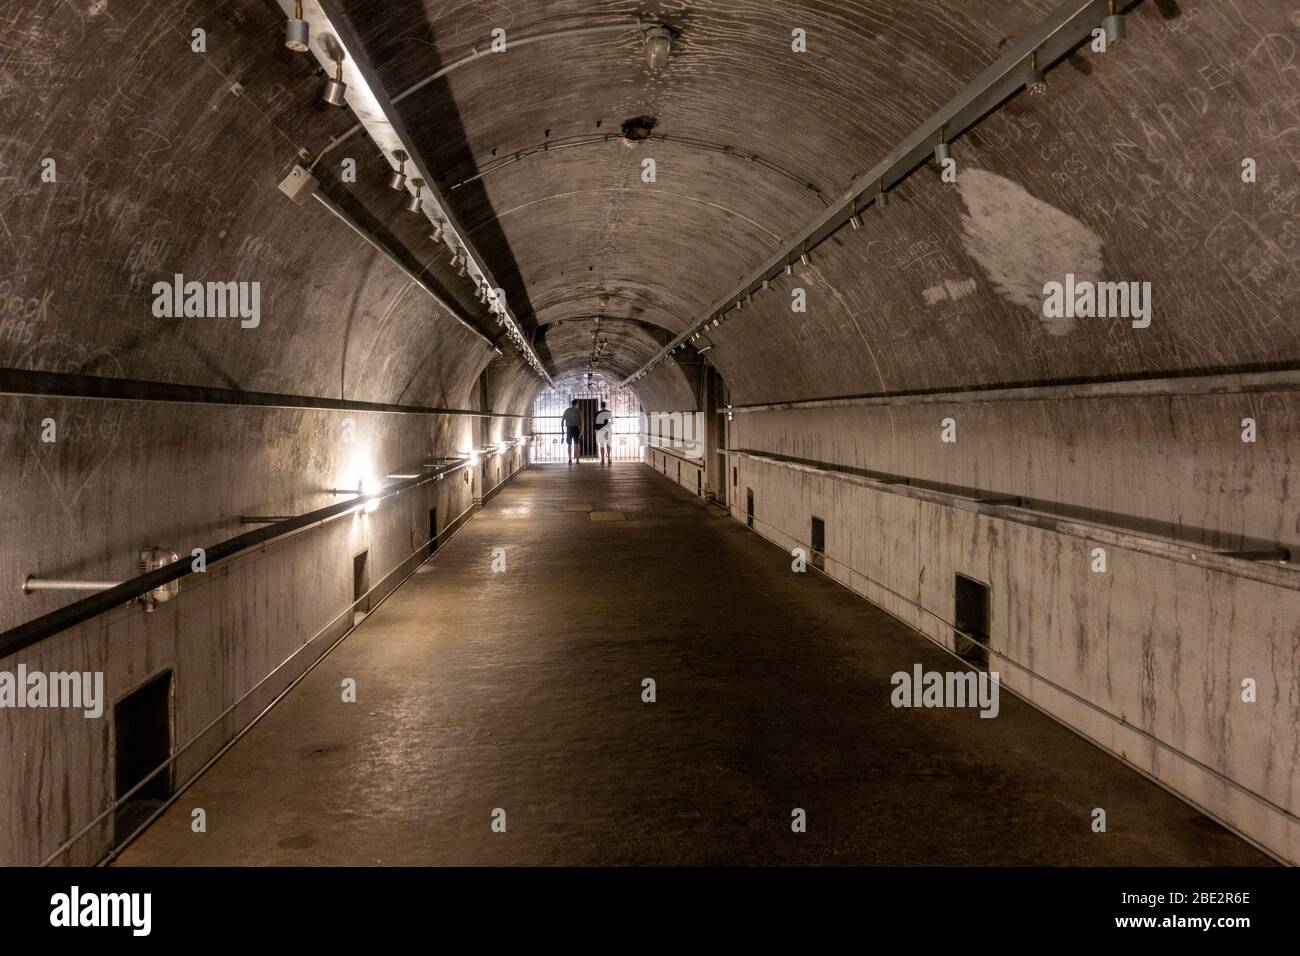 Collective air raid shelter in the Platterhofbunker or Gastehaus bunker, part of the Documentation Center Obersalzburg, Bavaria, Germany. Stock Photo